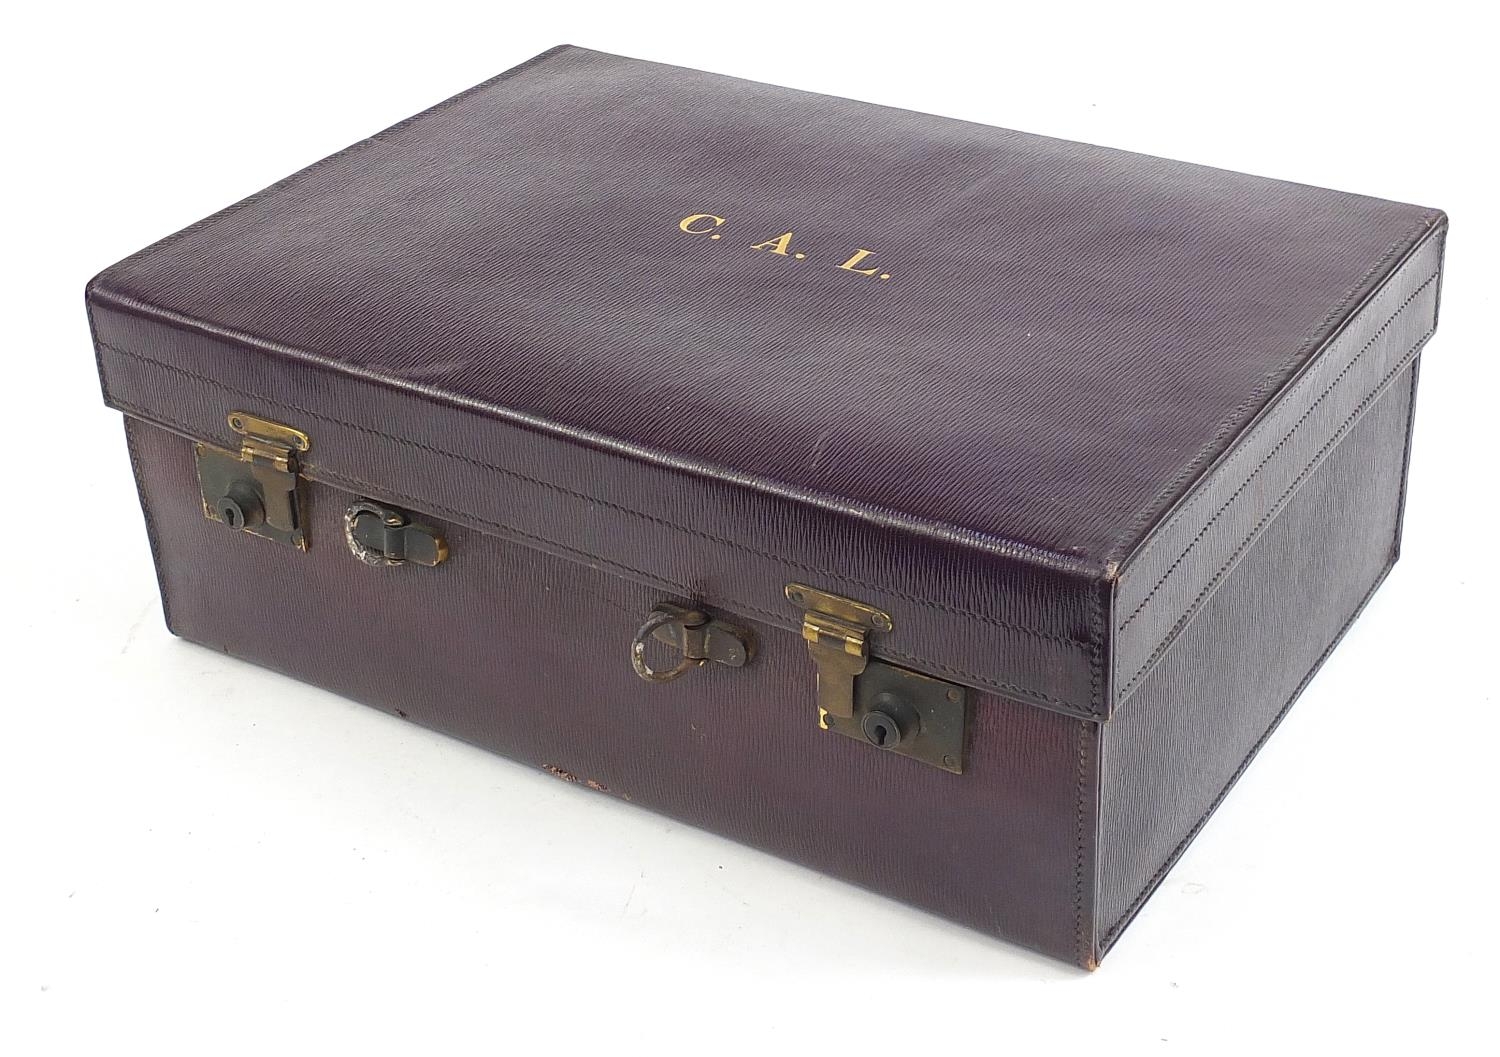 Edwardian purple leather travelling vanity case with silver mounted items including brushes, - Image 6 of 8